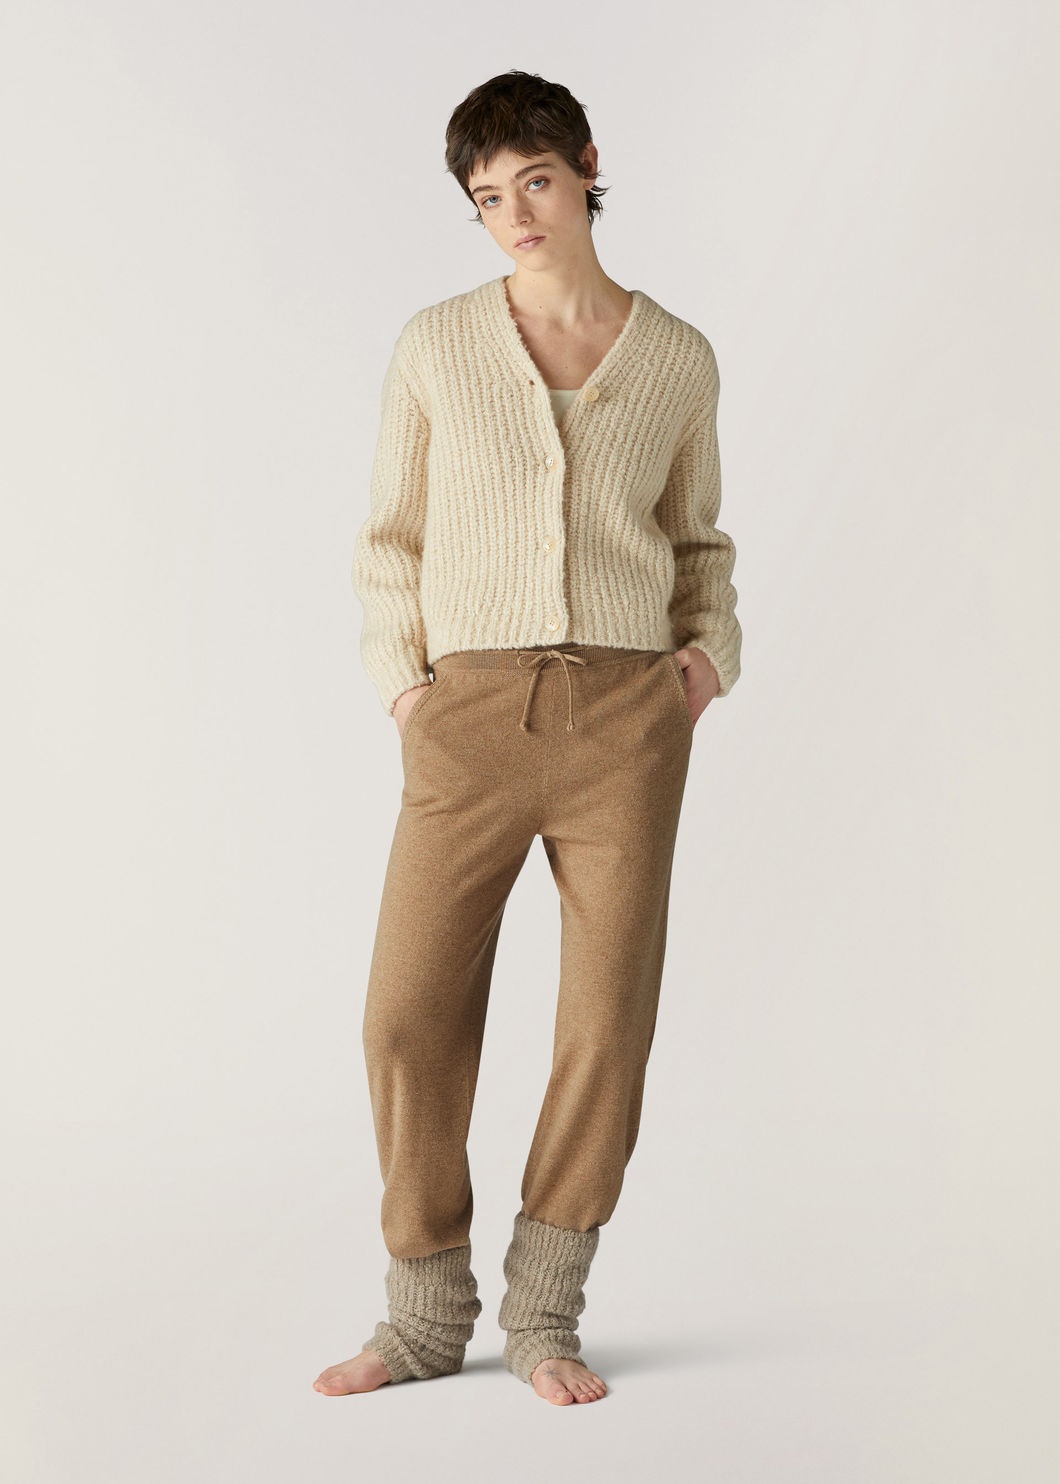 Cocooning Pants - 2